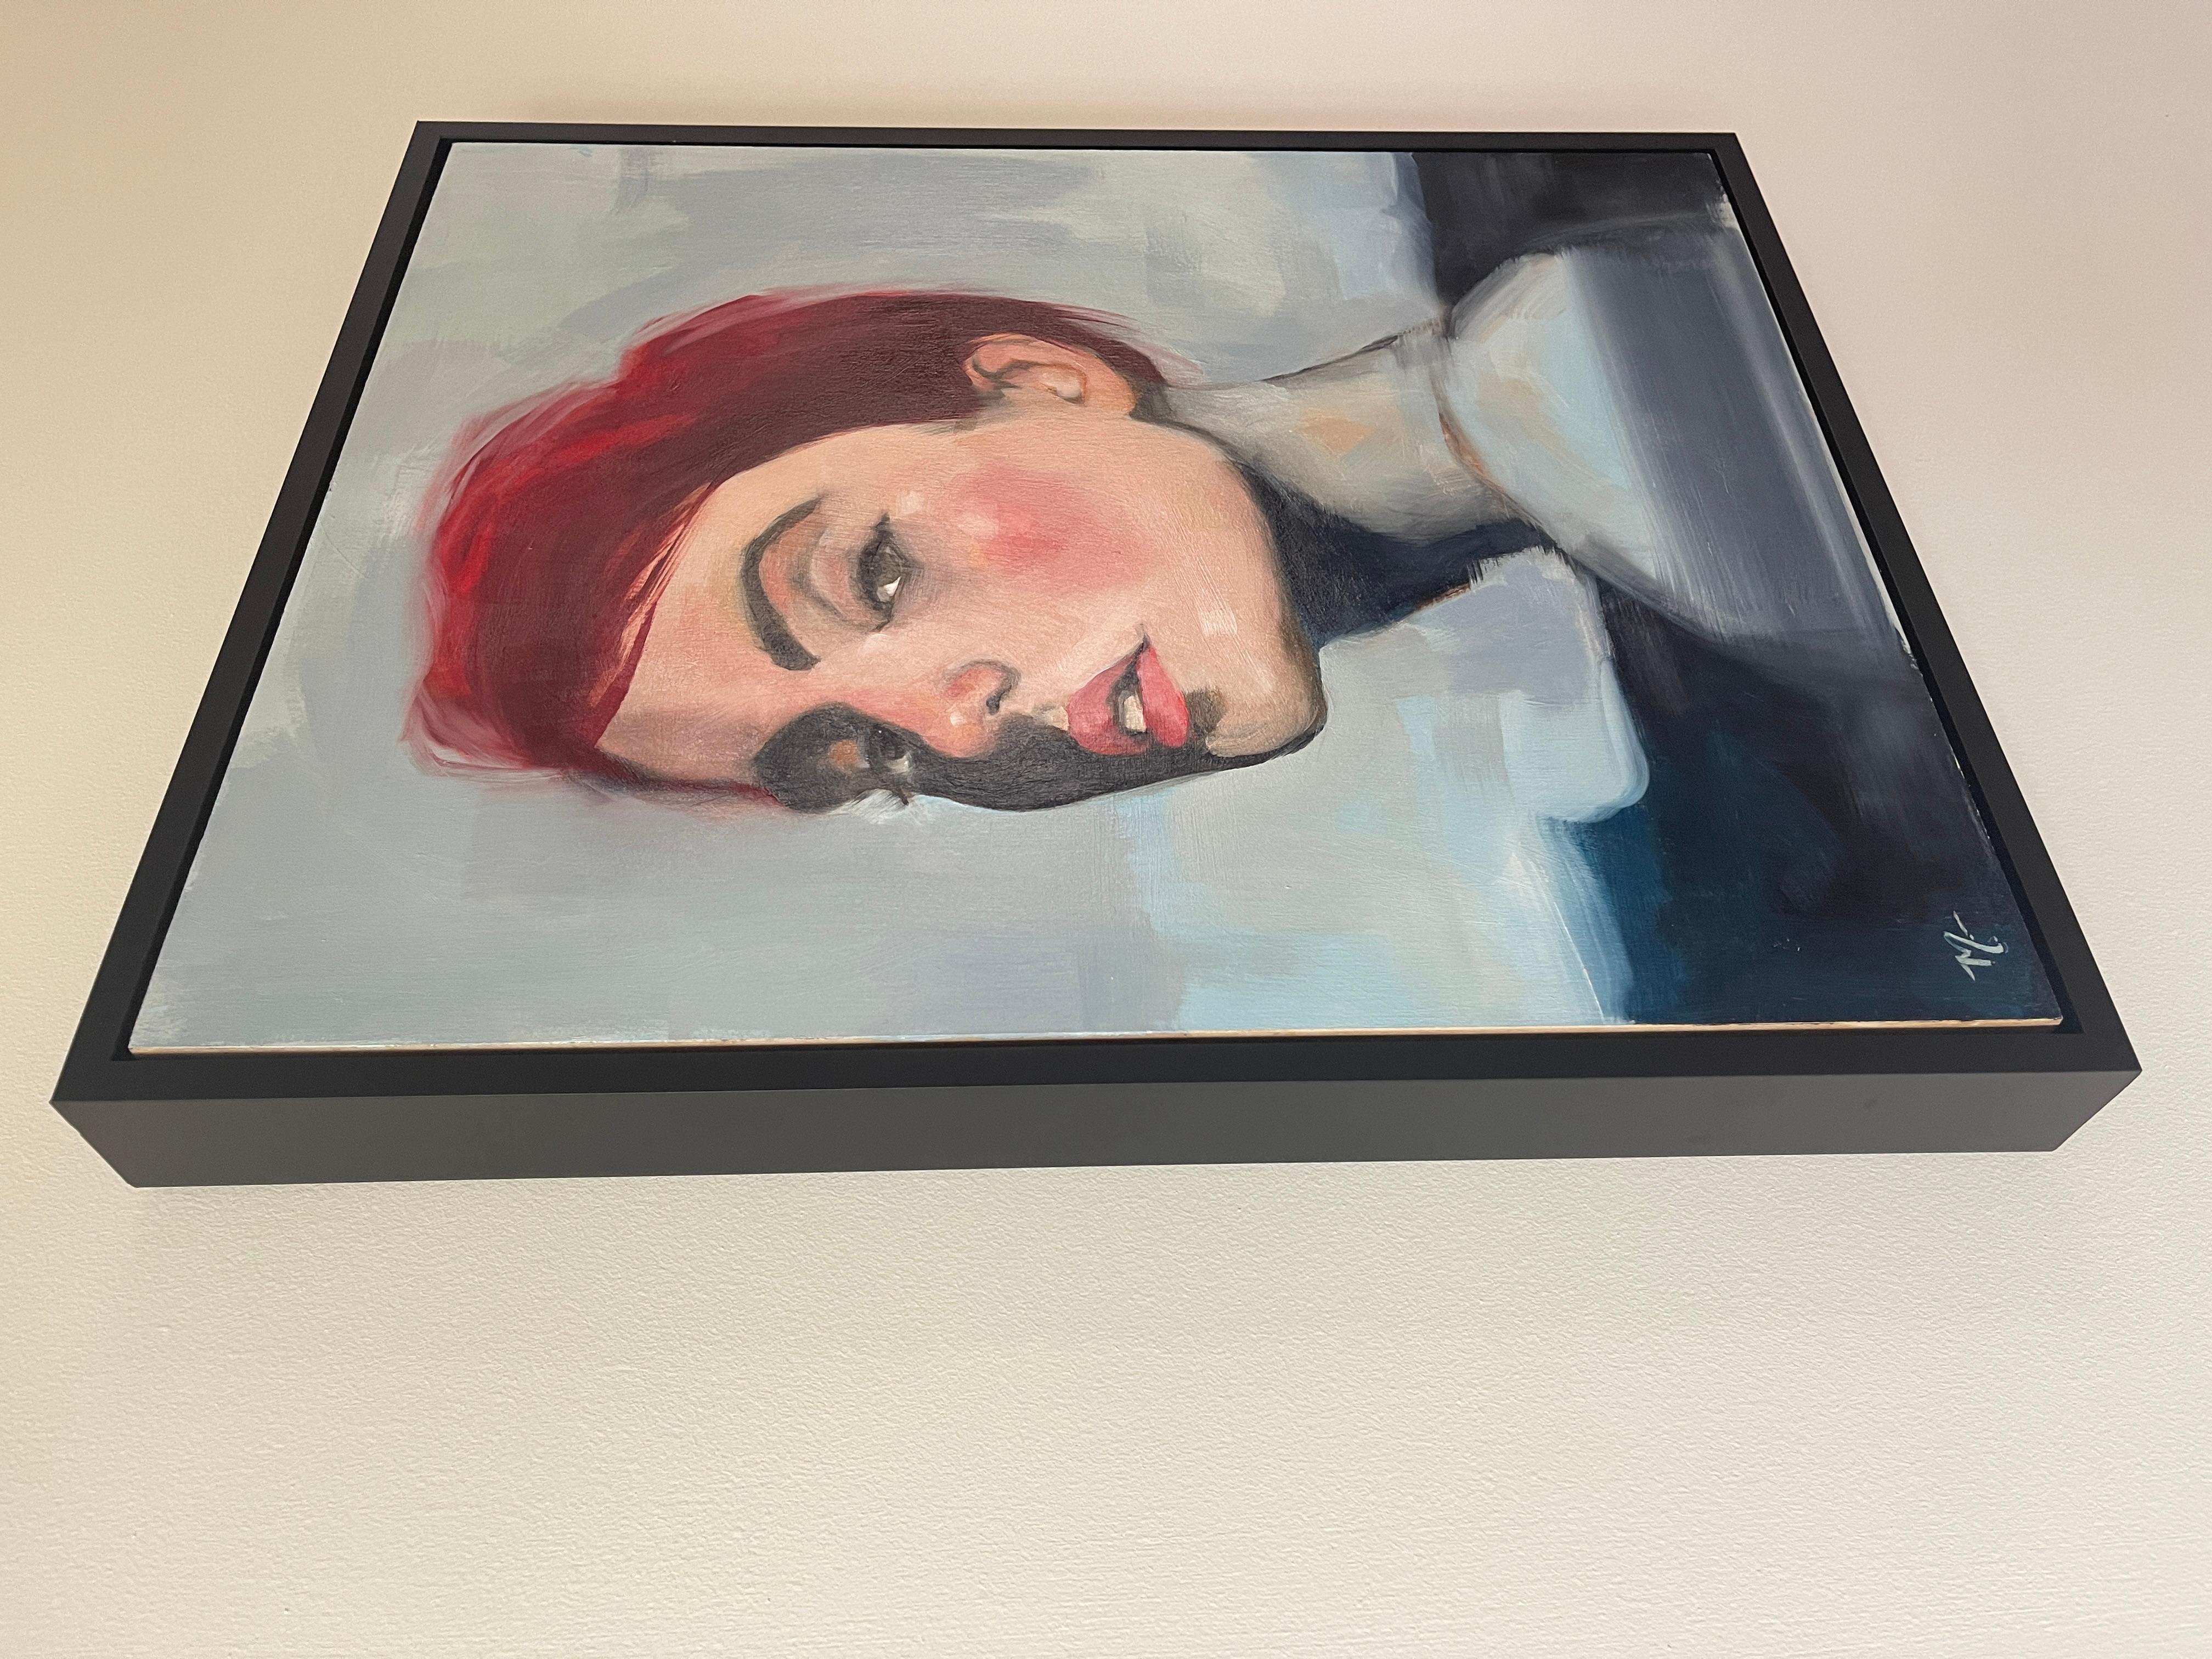 <p>Artist Comments<br>An androgynous figure rocks striking red hair and a piercing gaze. Artist Malia Pettit deliberately keeps the identity ambiguous, inviting open interpretation through the subject's portrayed posture and mood. The artwork comes